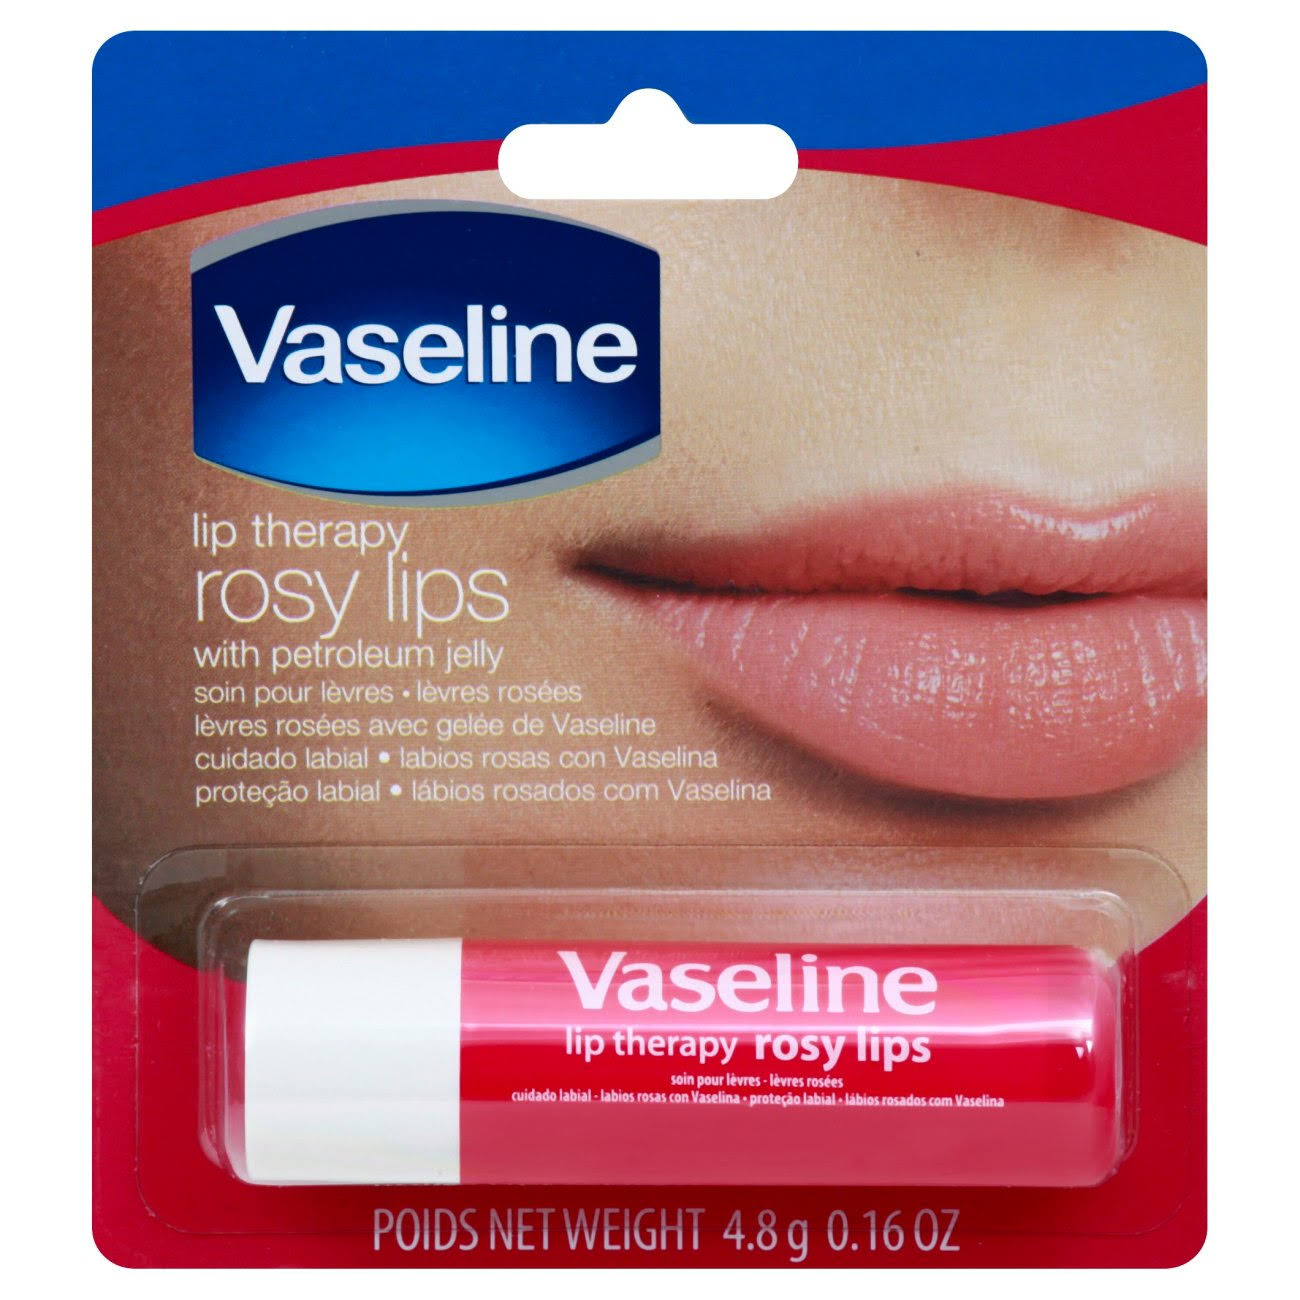 Vaseline Lip Therapy Rosy Lips | Lip Balm with Petroleum Jelly for